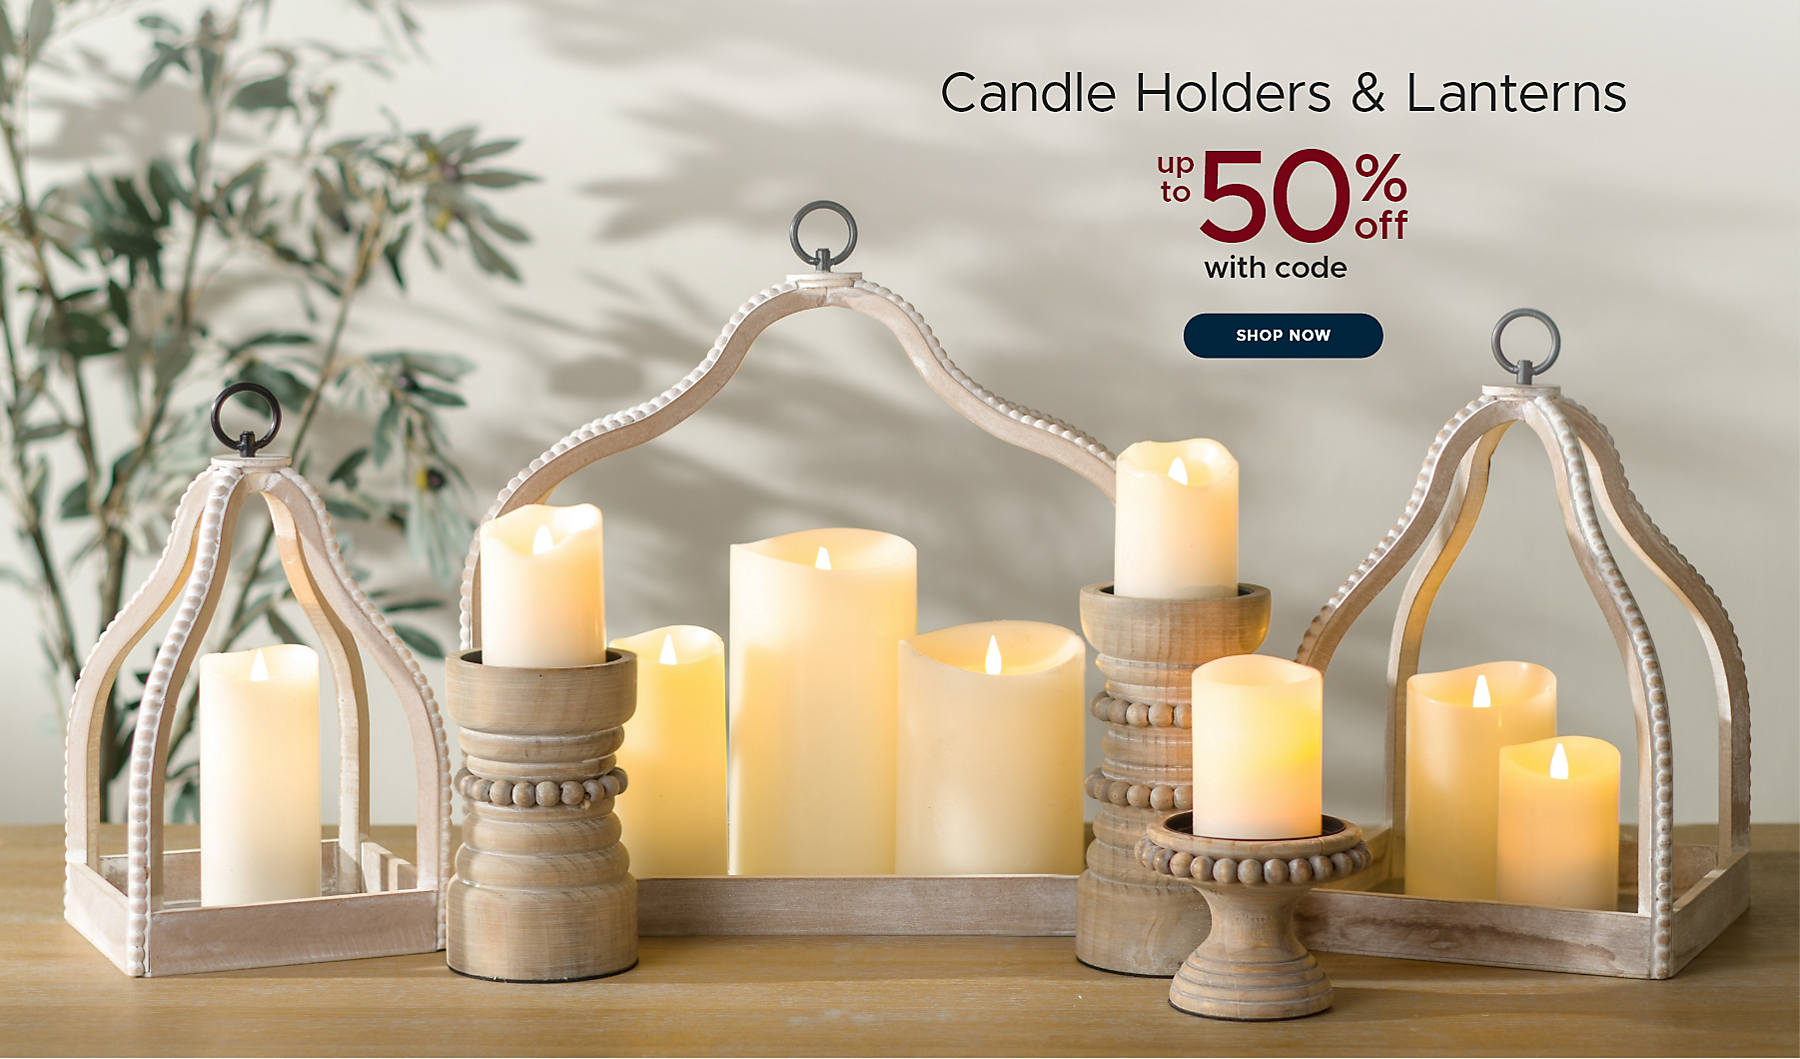 Candle Holders & Lanterns up to 50% off with code shop now